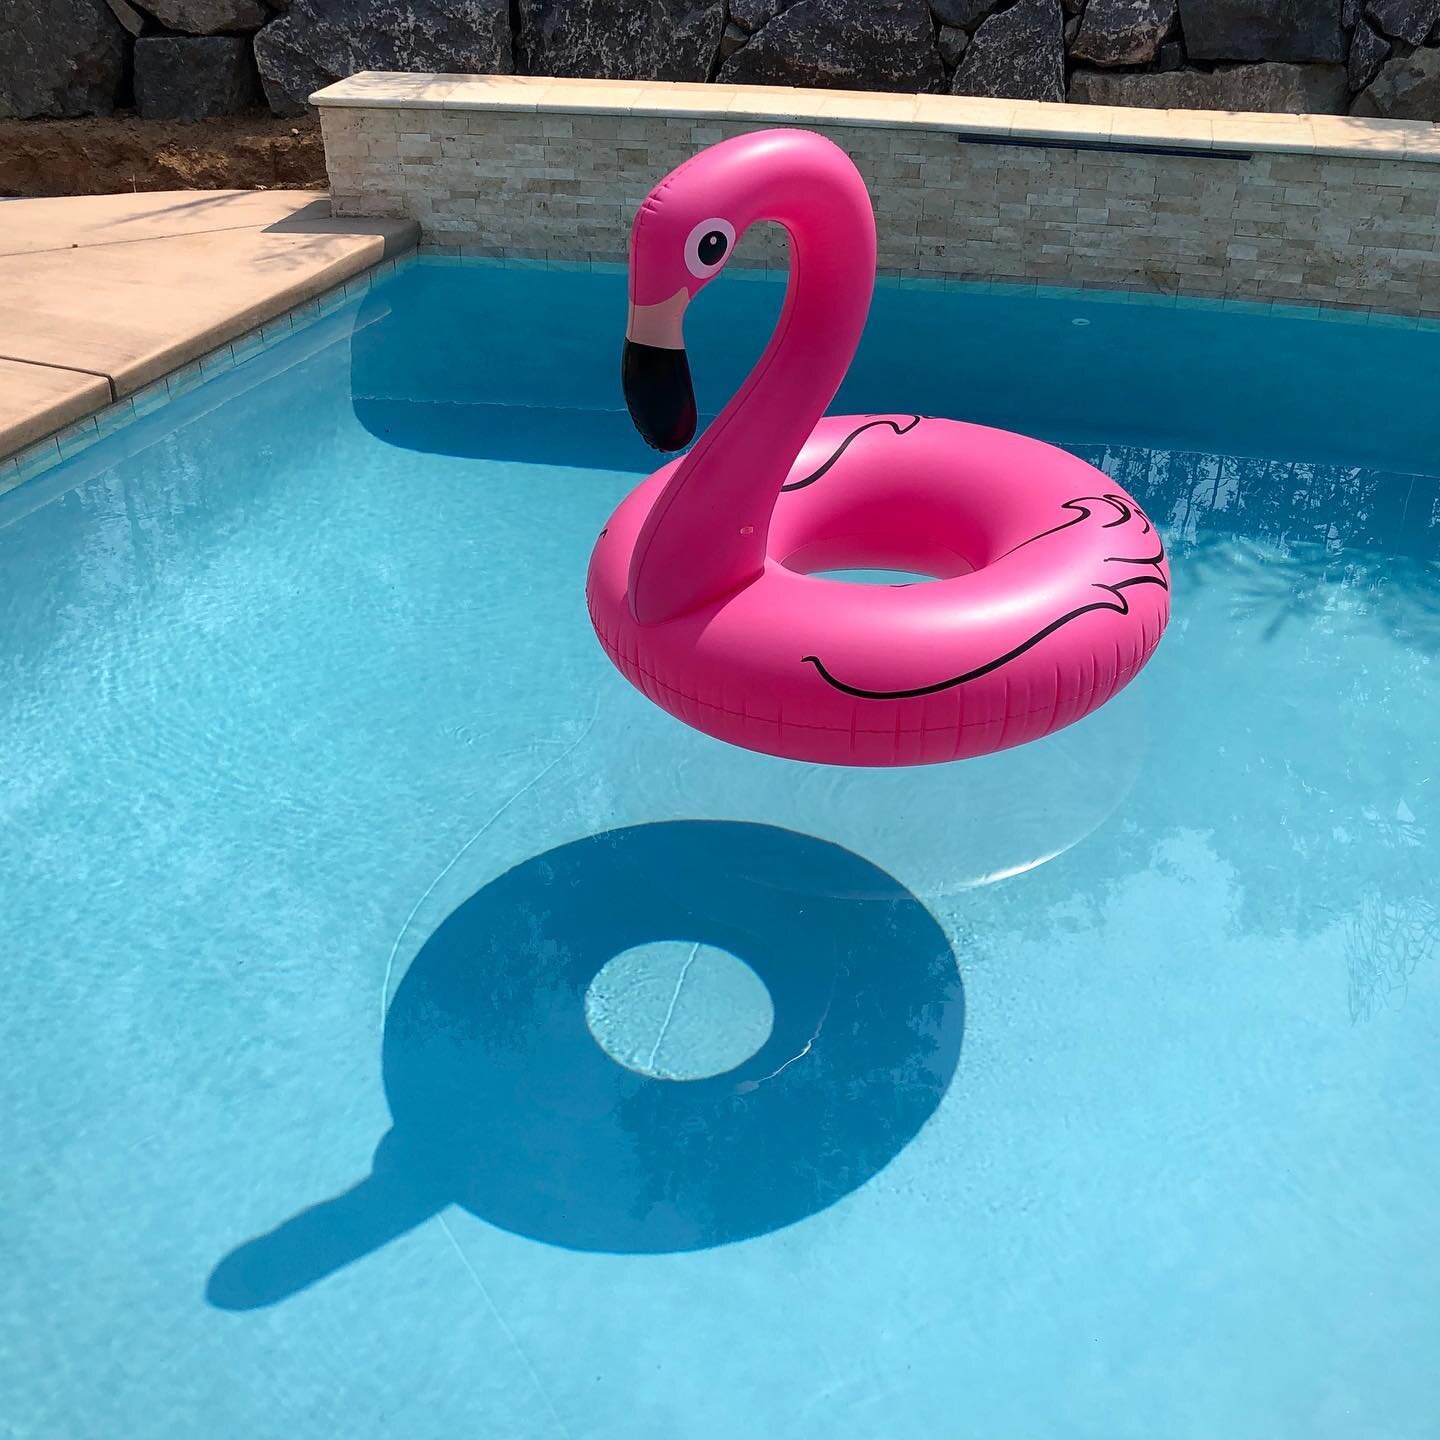 Reminds me of the song &ldquo;You&rsquo;re a flamingo, you stand on one leg...&rdquo;
.
.
.
.
.
#flamingo #pinkflamingo #violentfemmes #pool